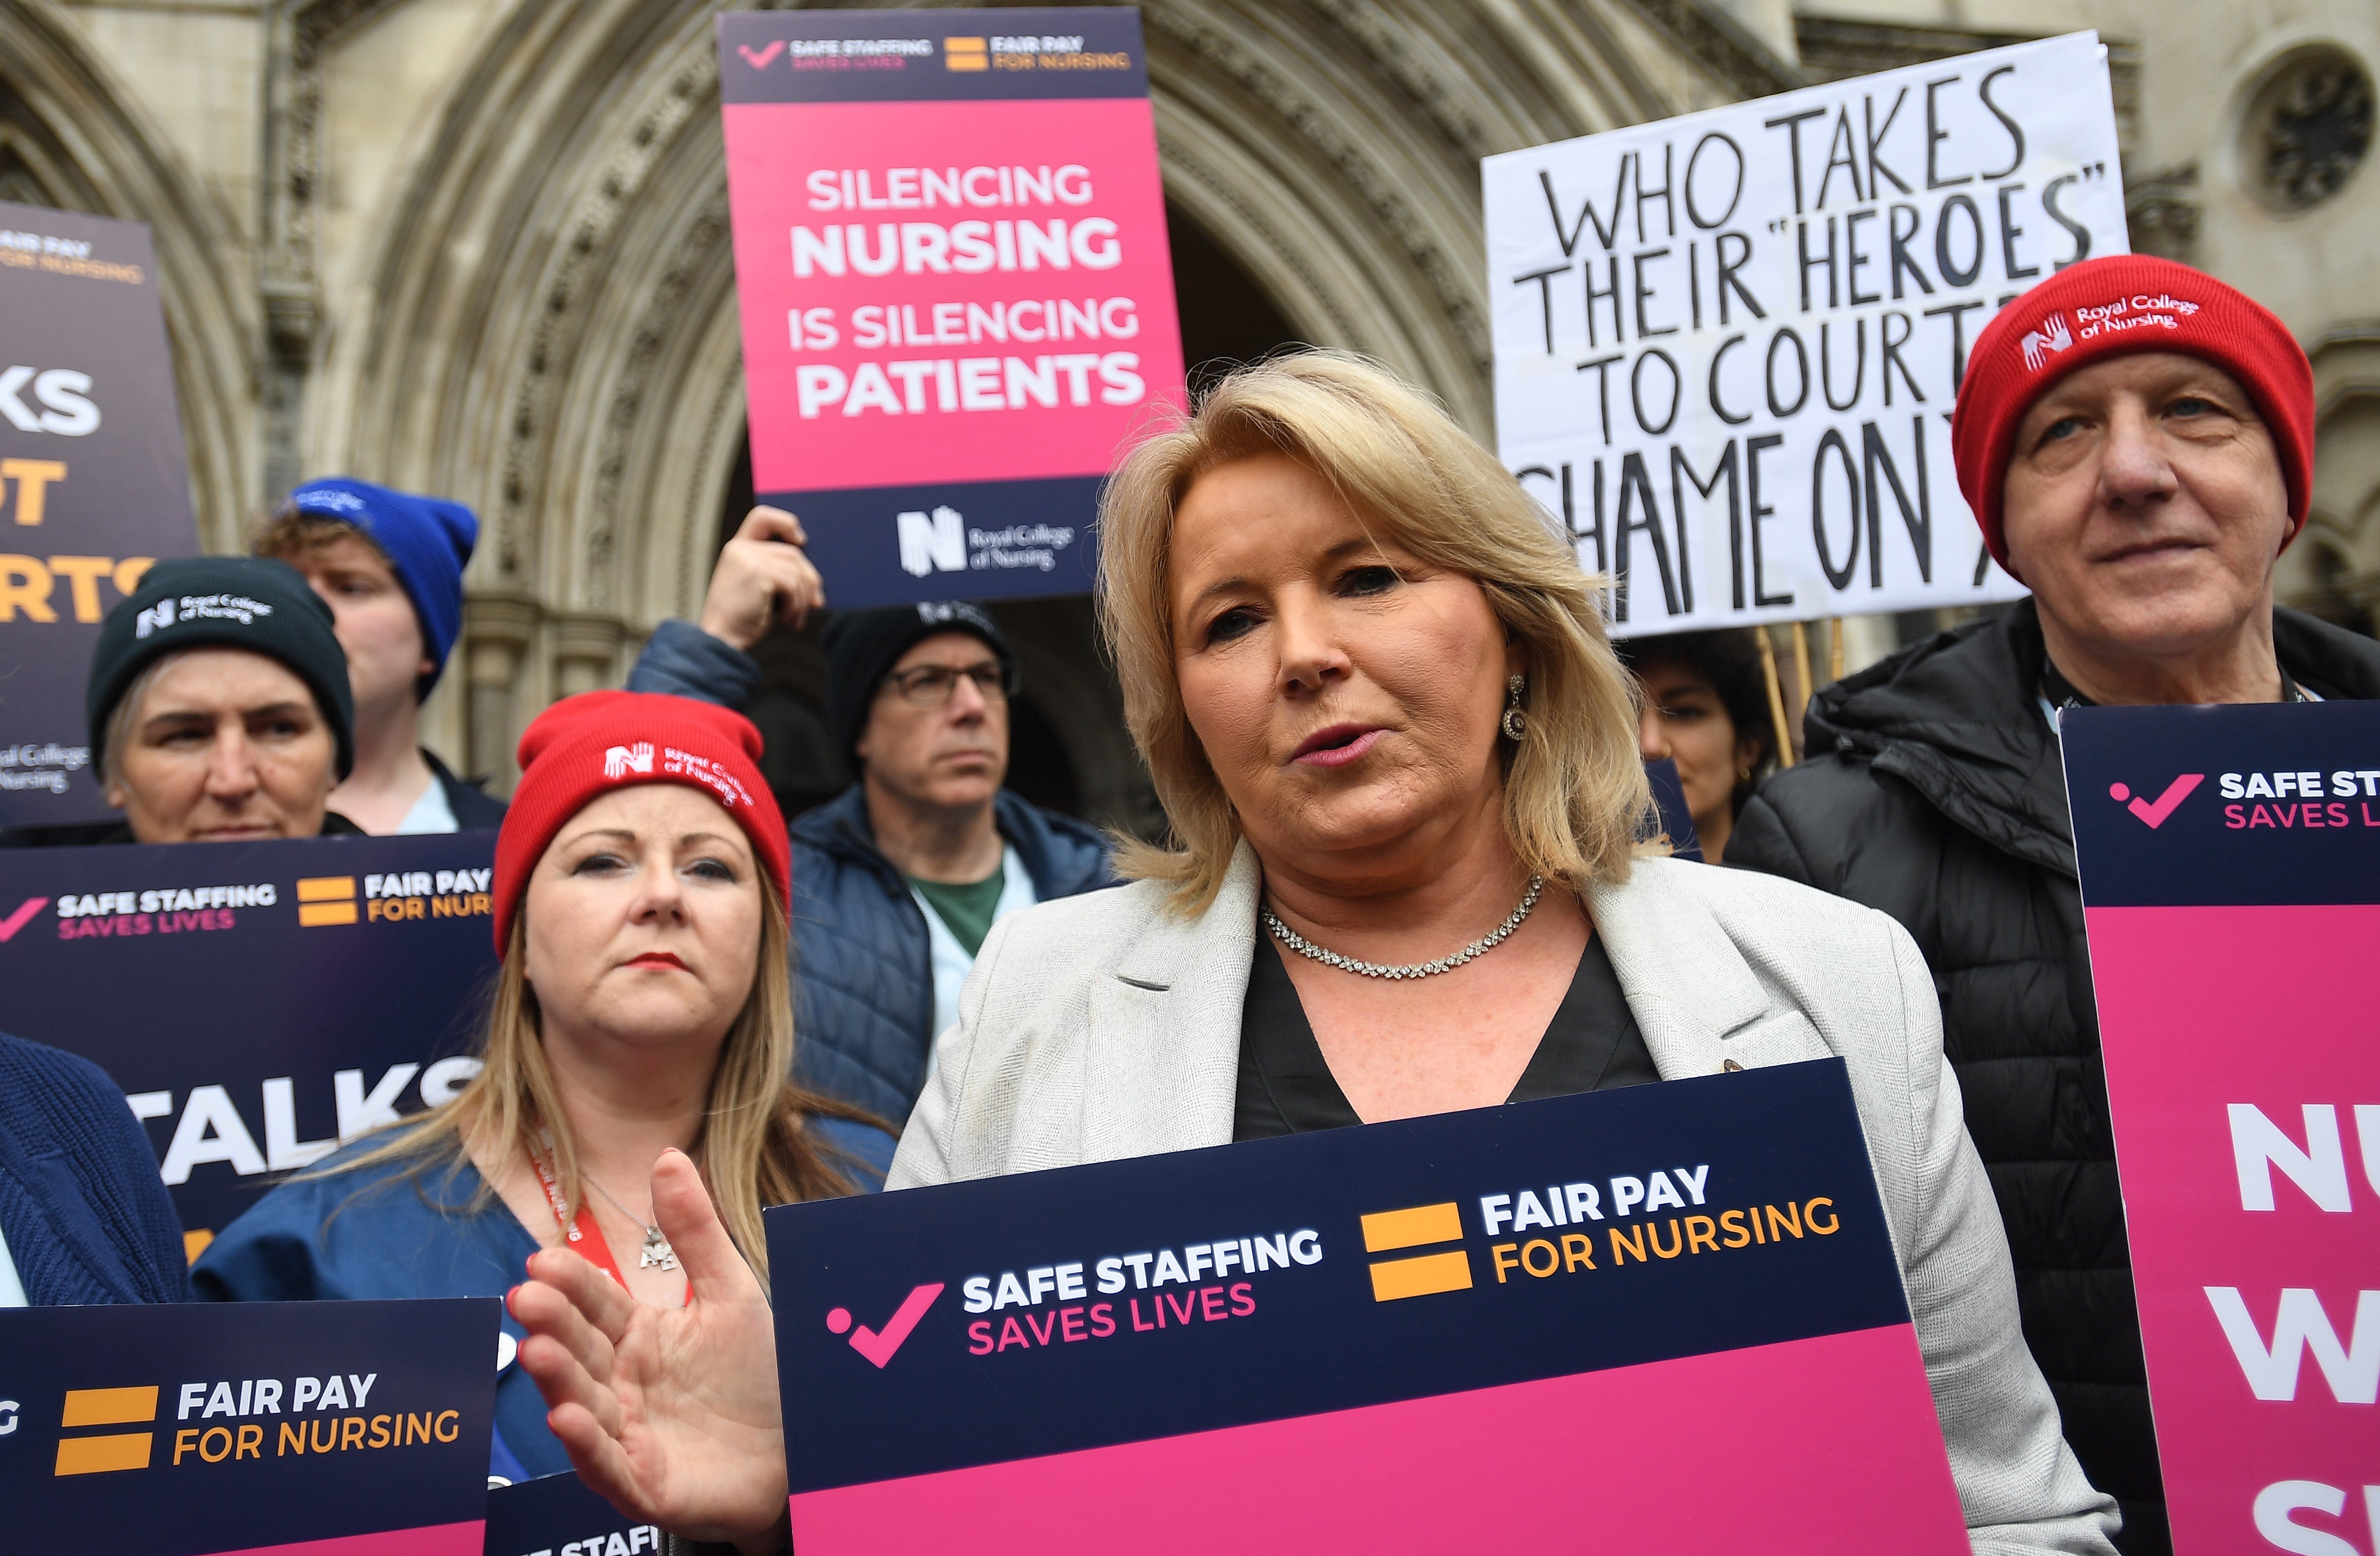 RCN members could still take strike action, but ministers may feel they have the upper hand